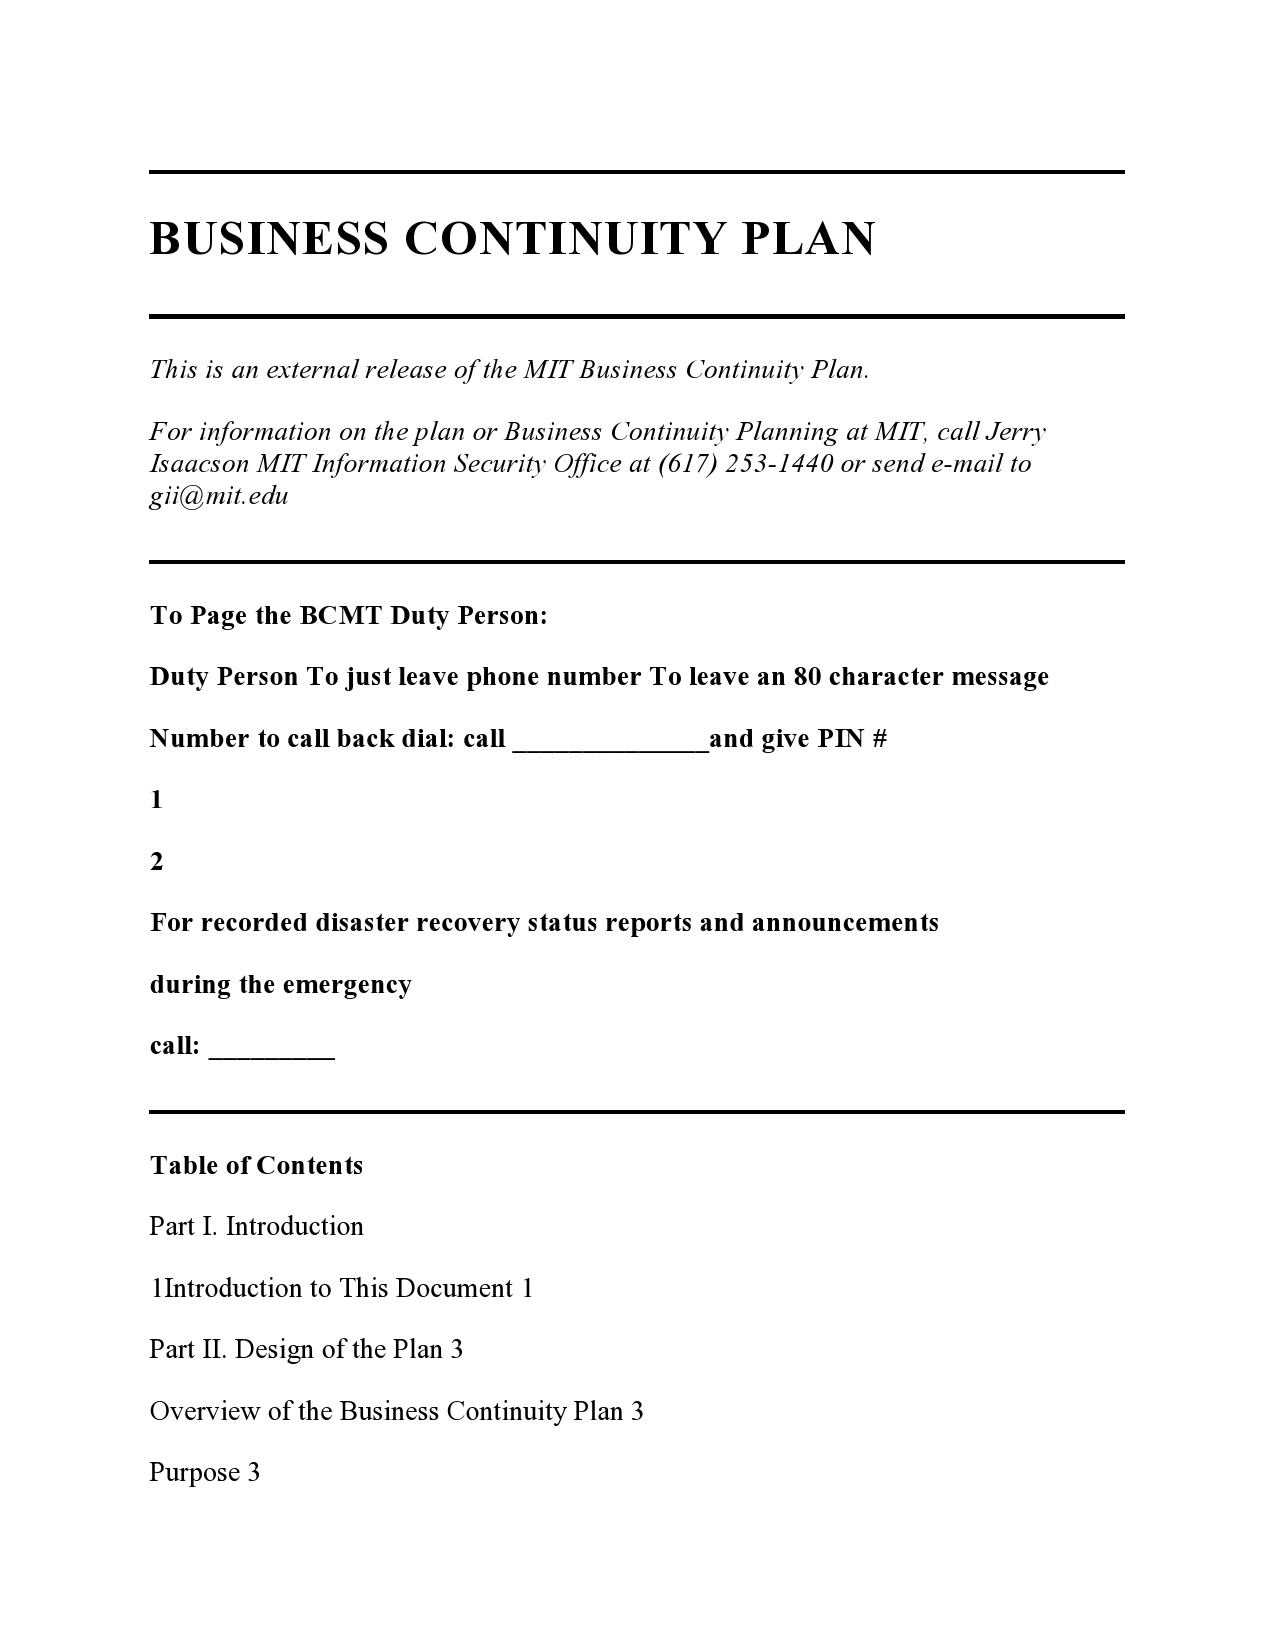 Free business continuity plan template 15